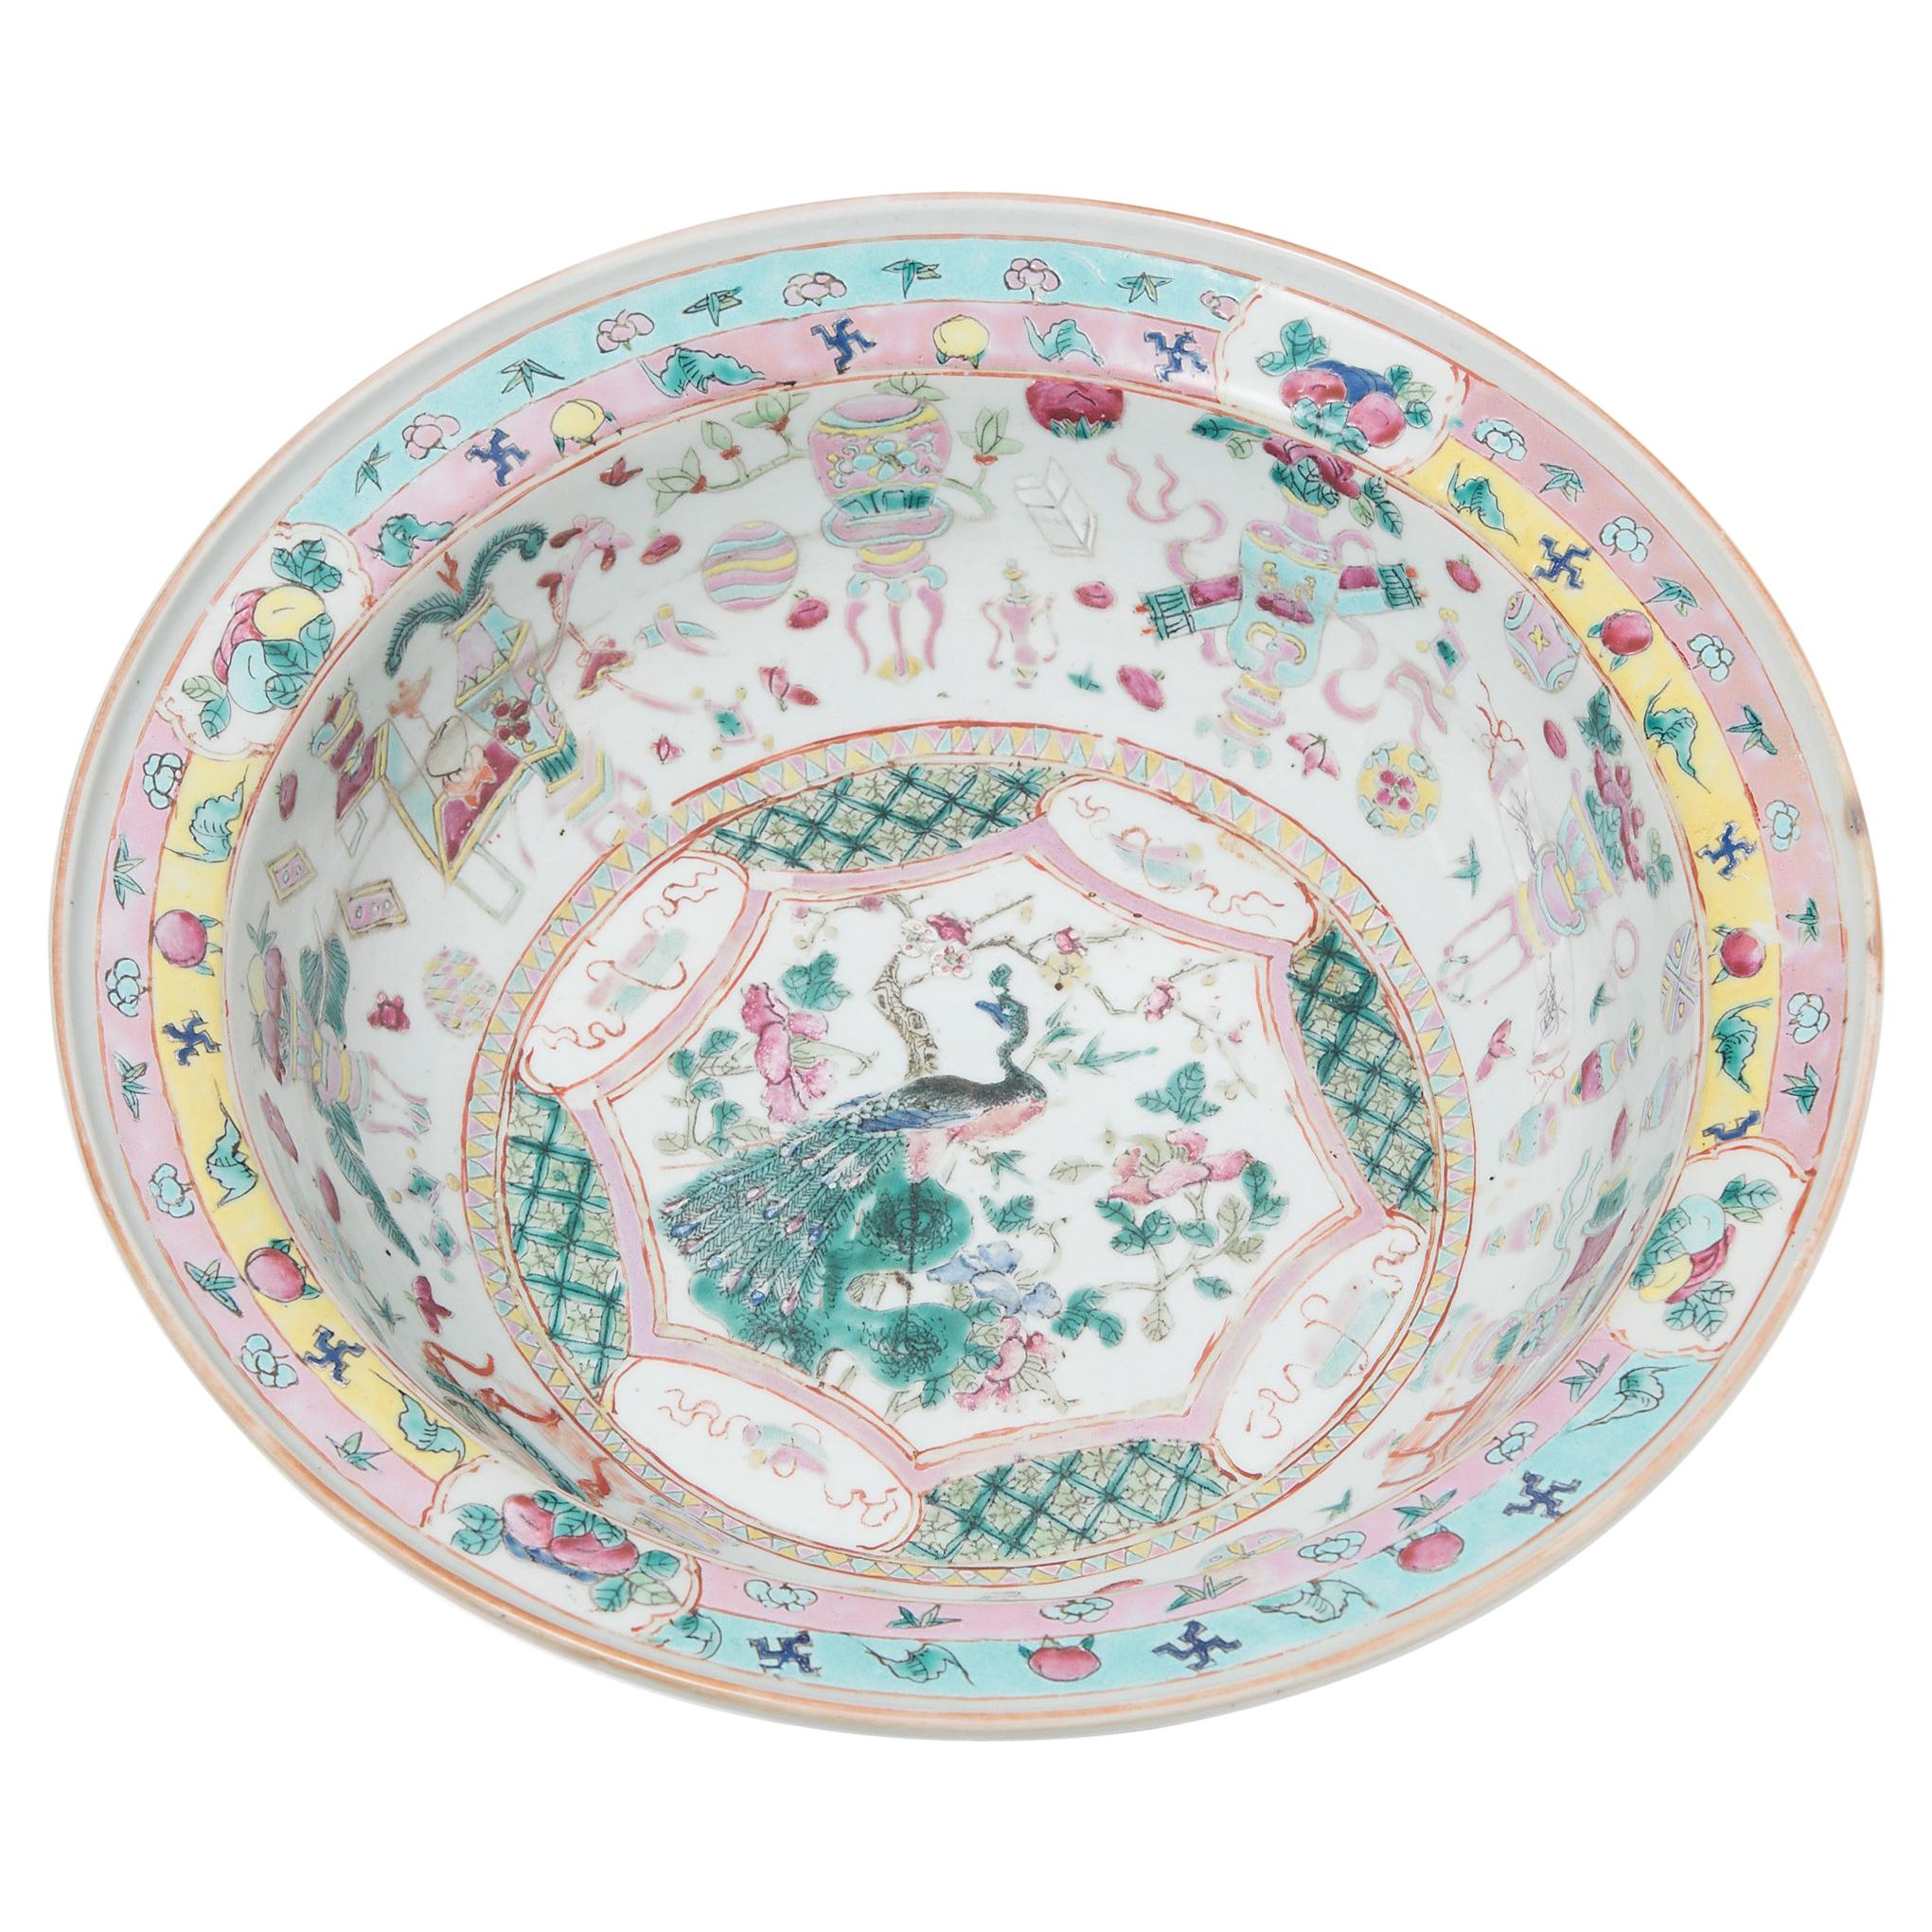 Chinese Famille Rose Bowl with Scholars' Objects, c. 1850 For Sale